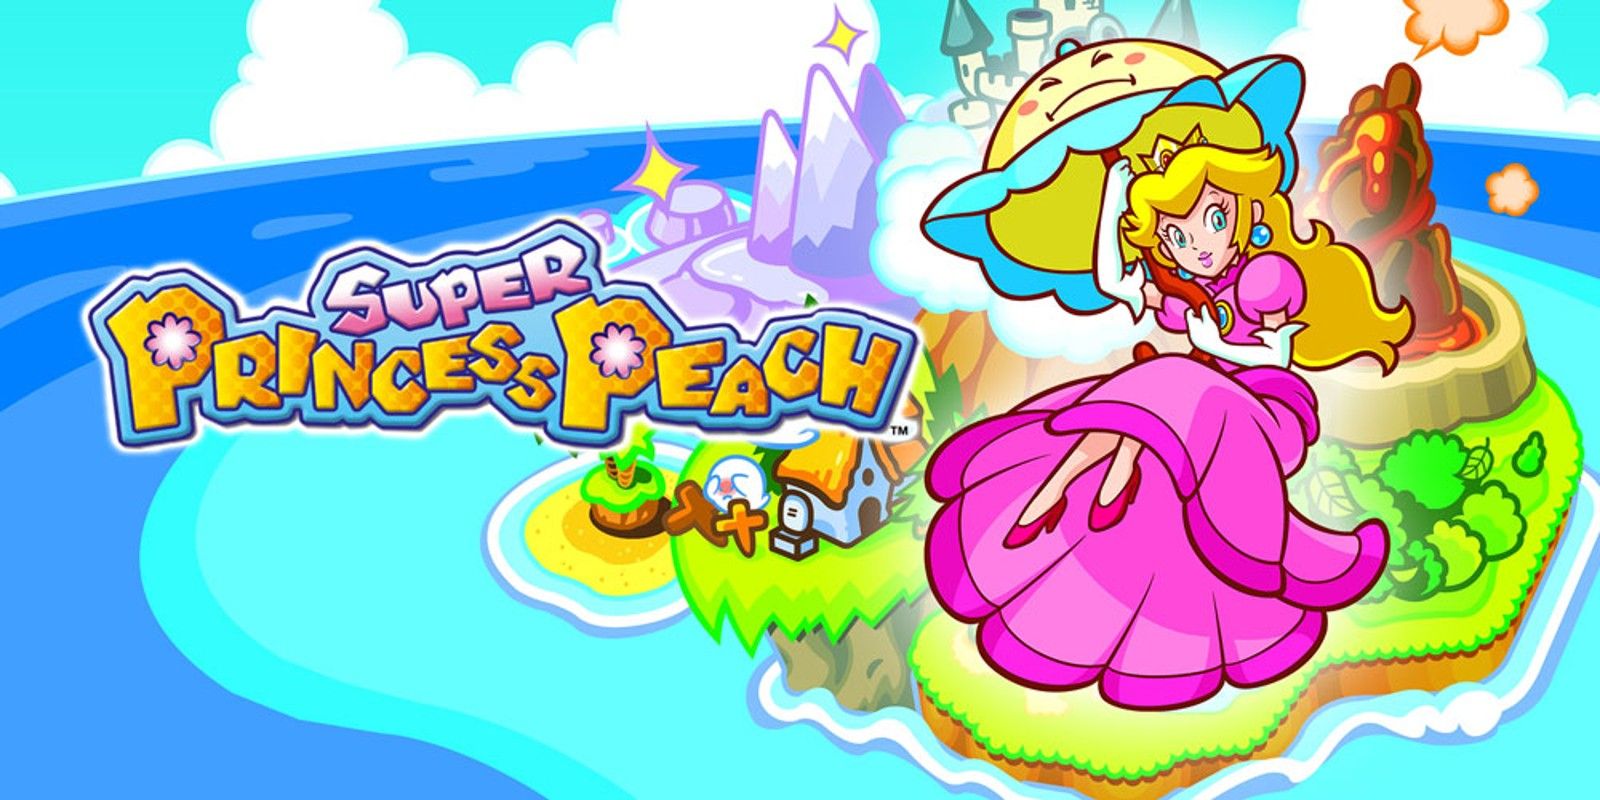 the-untitled-princess-peach-video-game-could-explore-many-stories-from-the-mario-universe